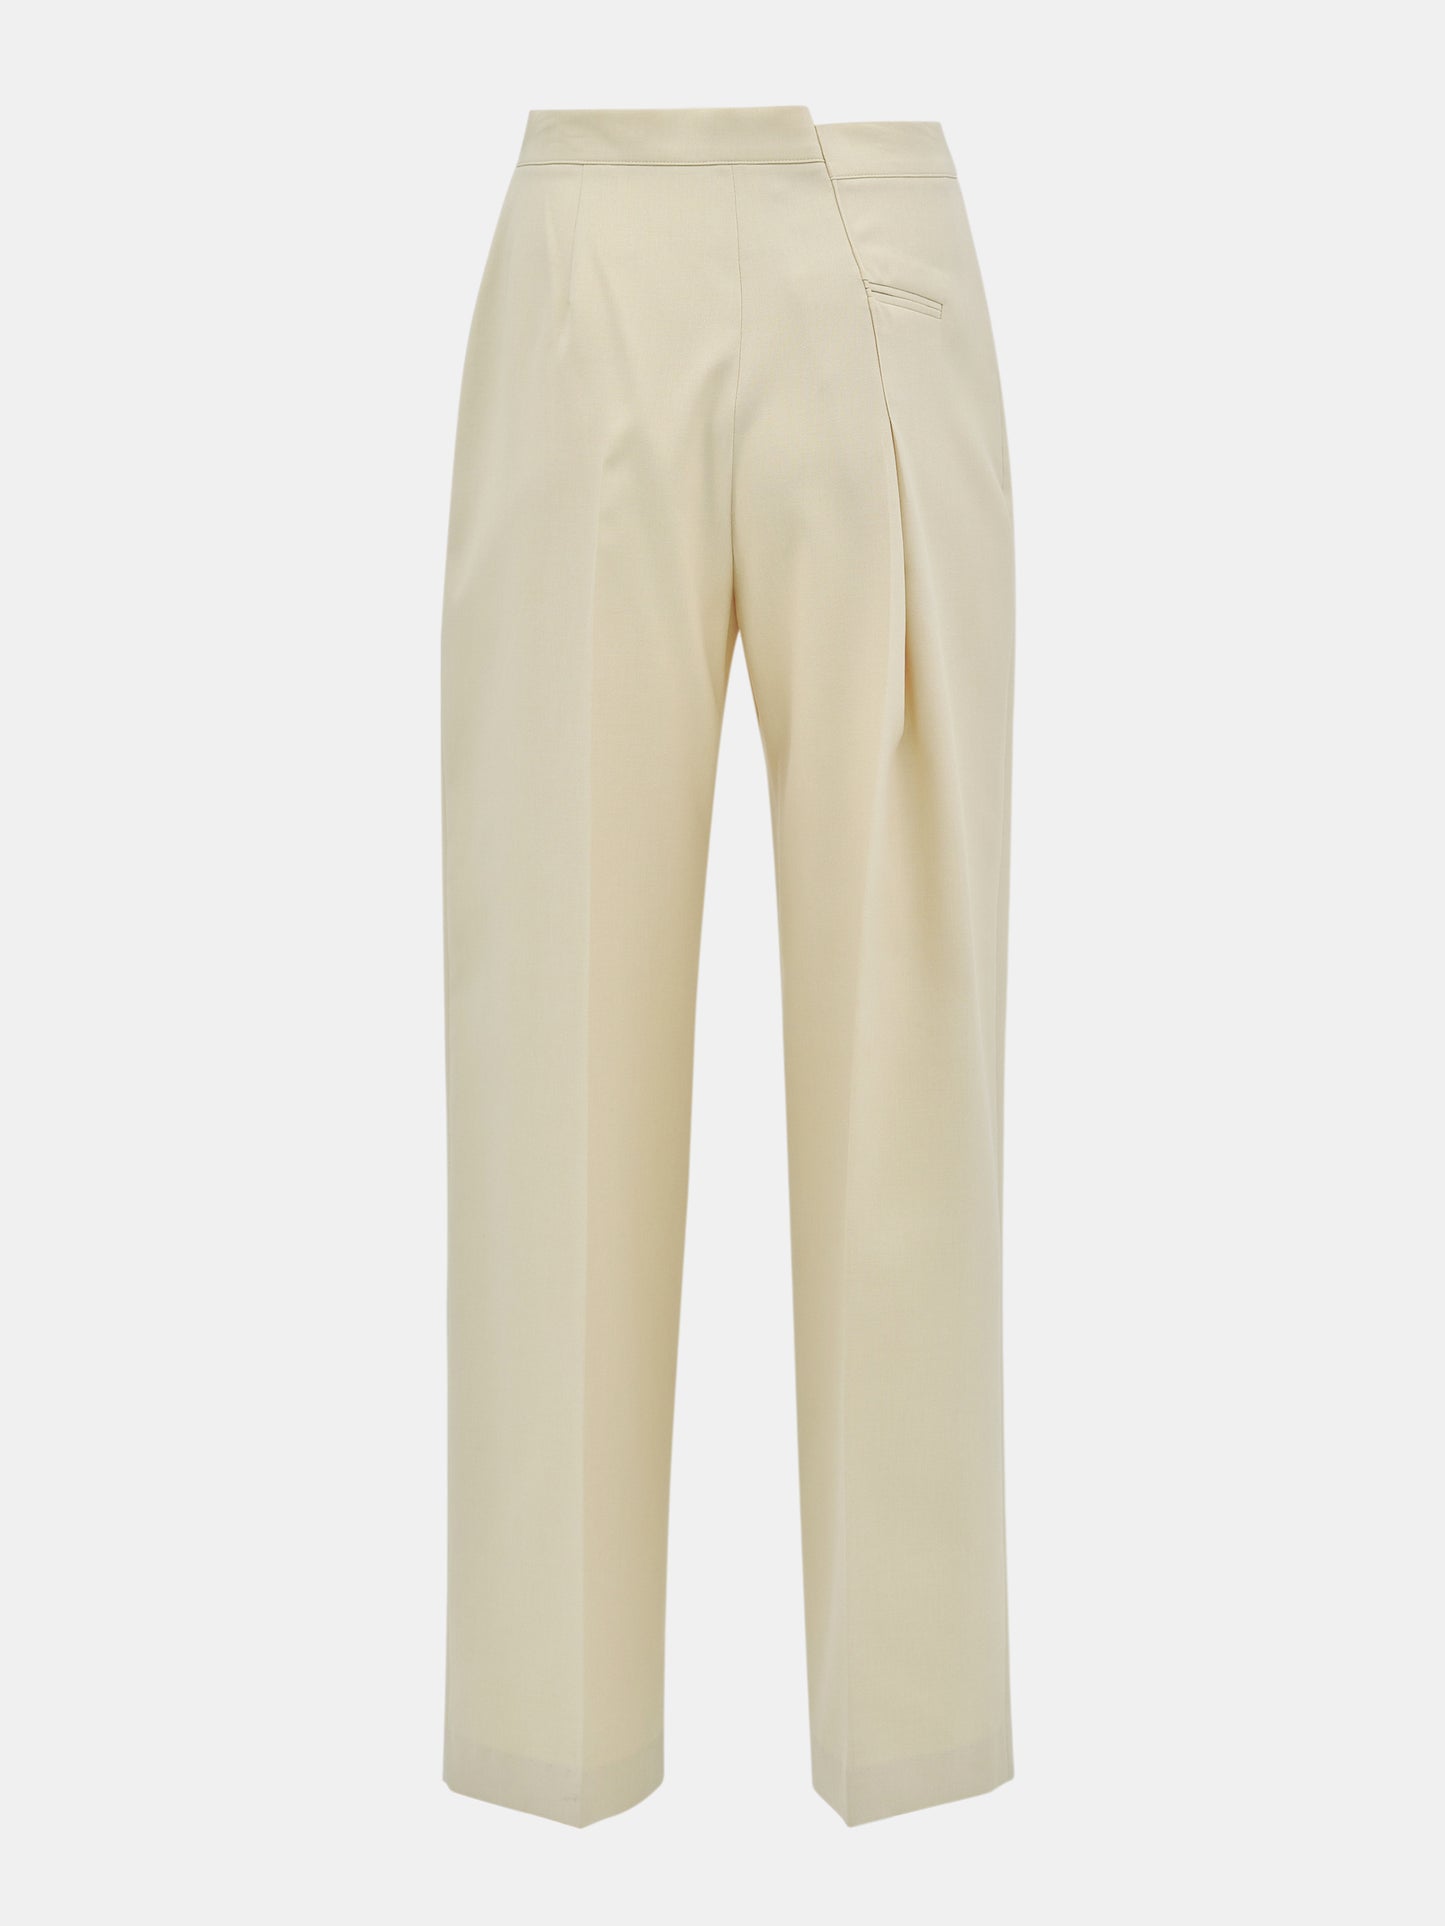 Off-Centre Suit Trousers, Light Yellow